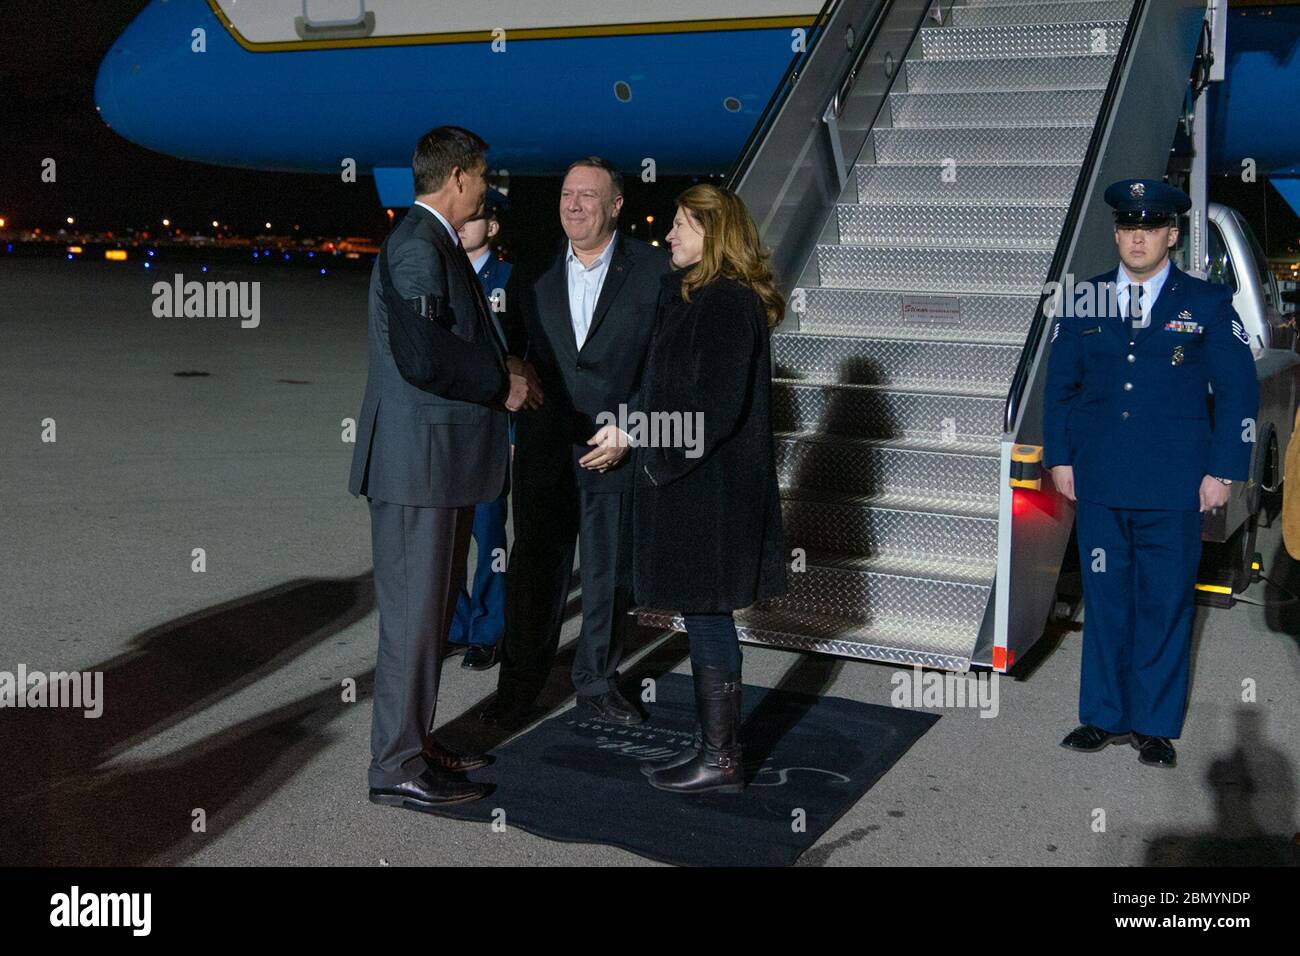 Secretary Pompeo Arrives in San Jose, CA Secretary of State Michael R. Pompeo and his wife, Susan Pompeo, arrive in San Jose, CA and are met by Under Secretary Keith Krach on January 12, 2020. Stock Photo